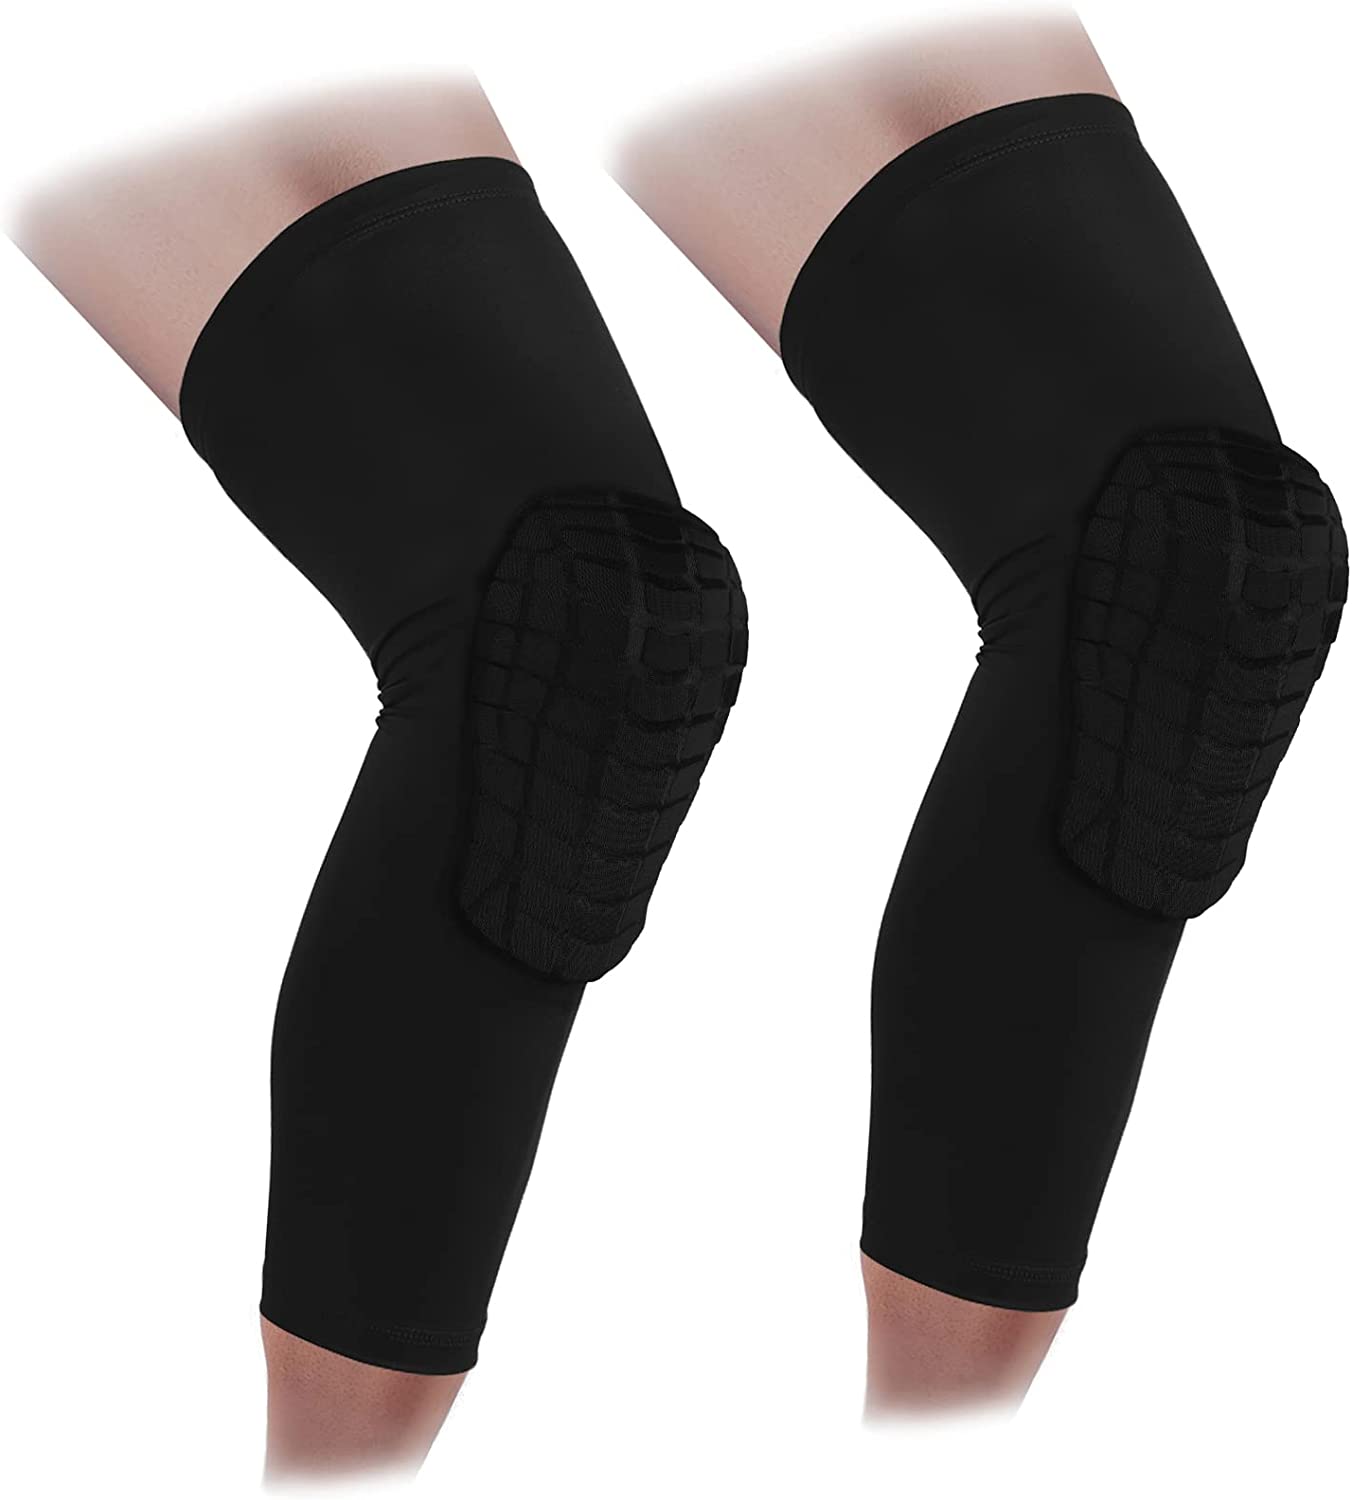  5. Cantop Basketball Compression Leg Sleeves Knee Pads 